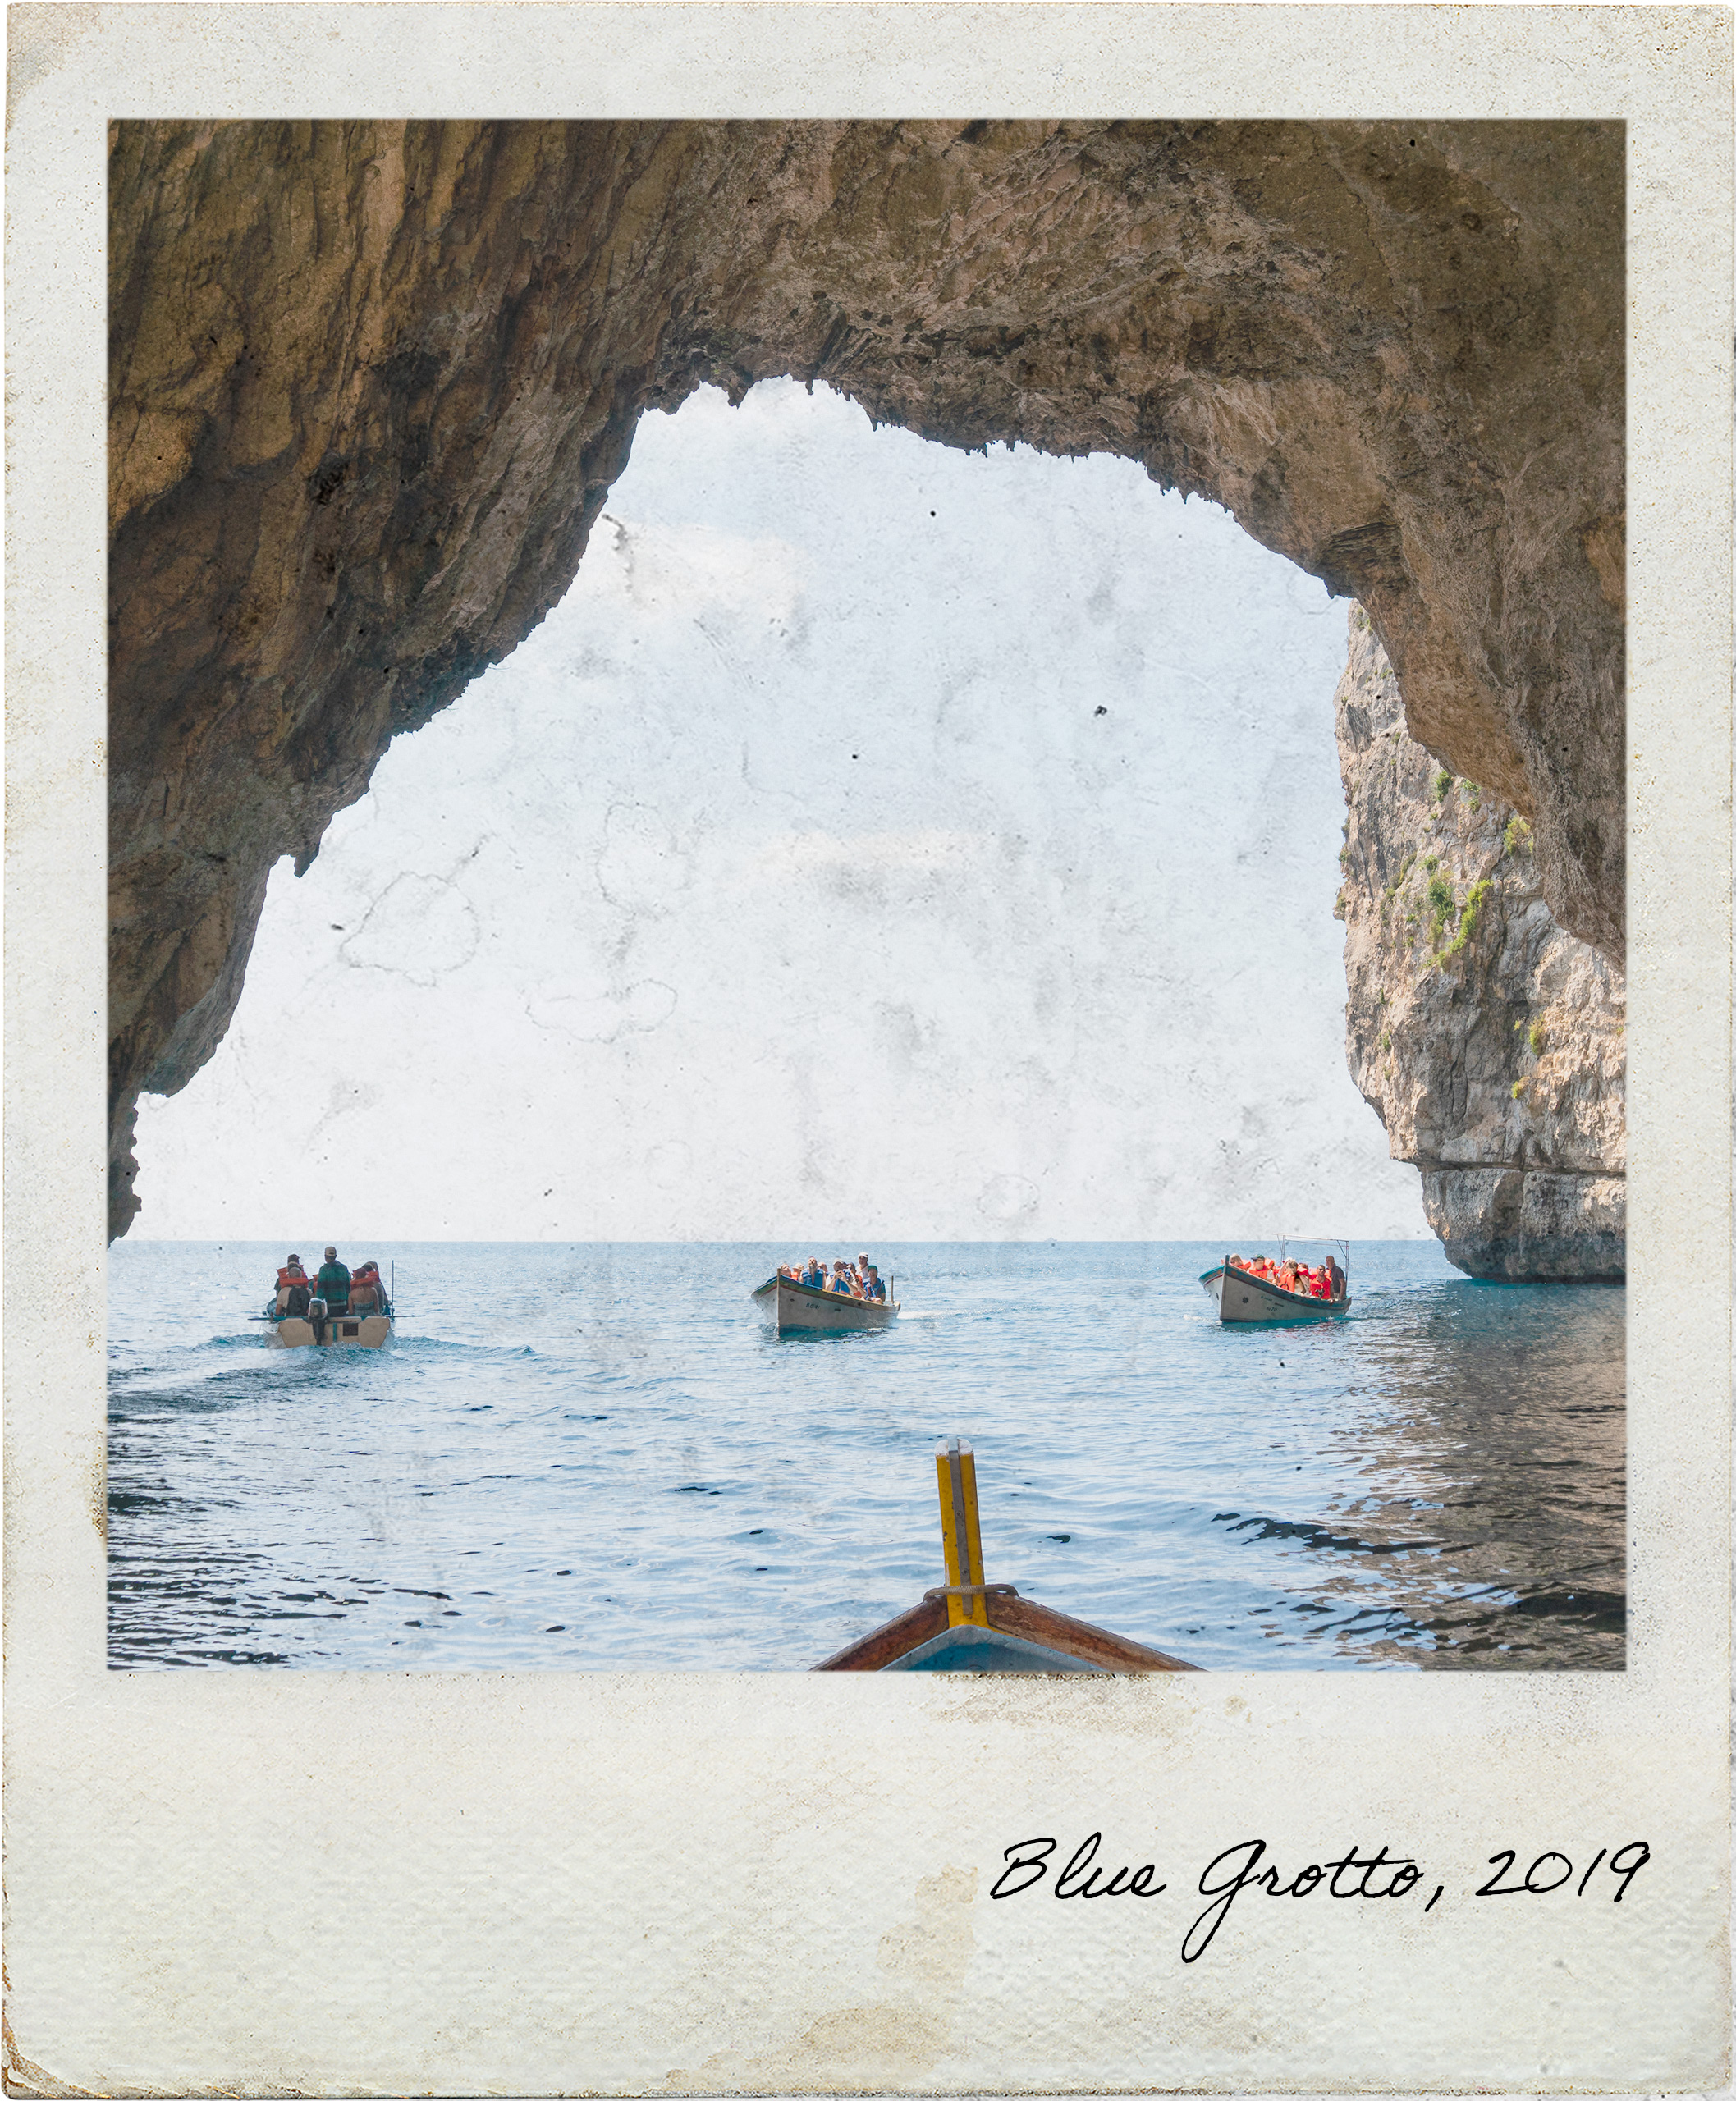 Boat trip inside the Blue Grotto